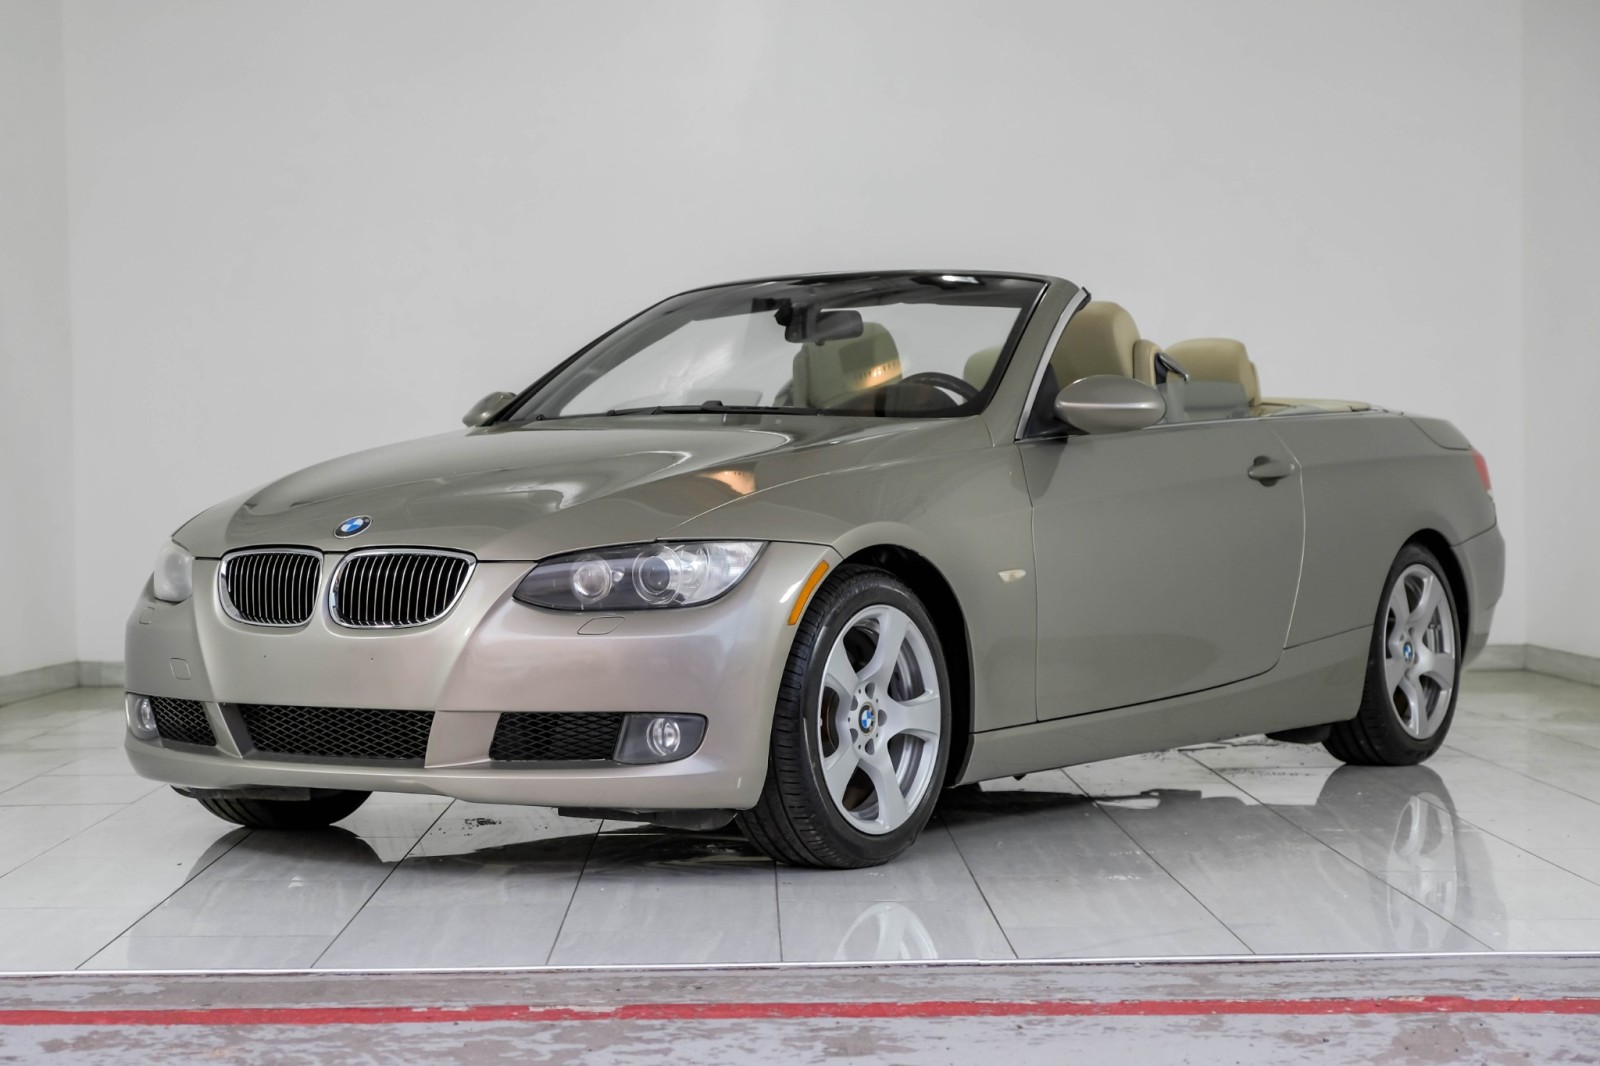 2007 BMW 328i Convertible AUTOMATIC LEATHER HEATED SEATS PUSH BUTTON START D 8